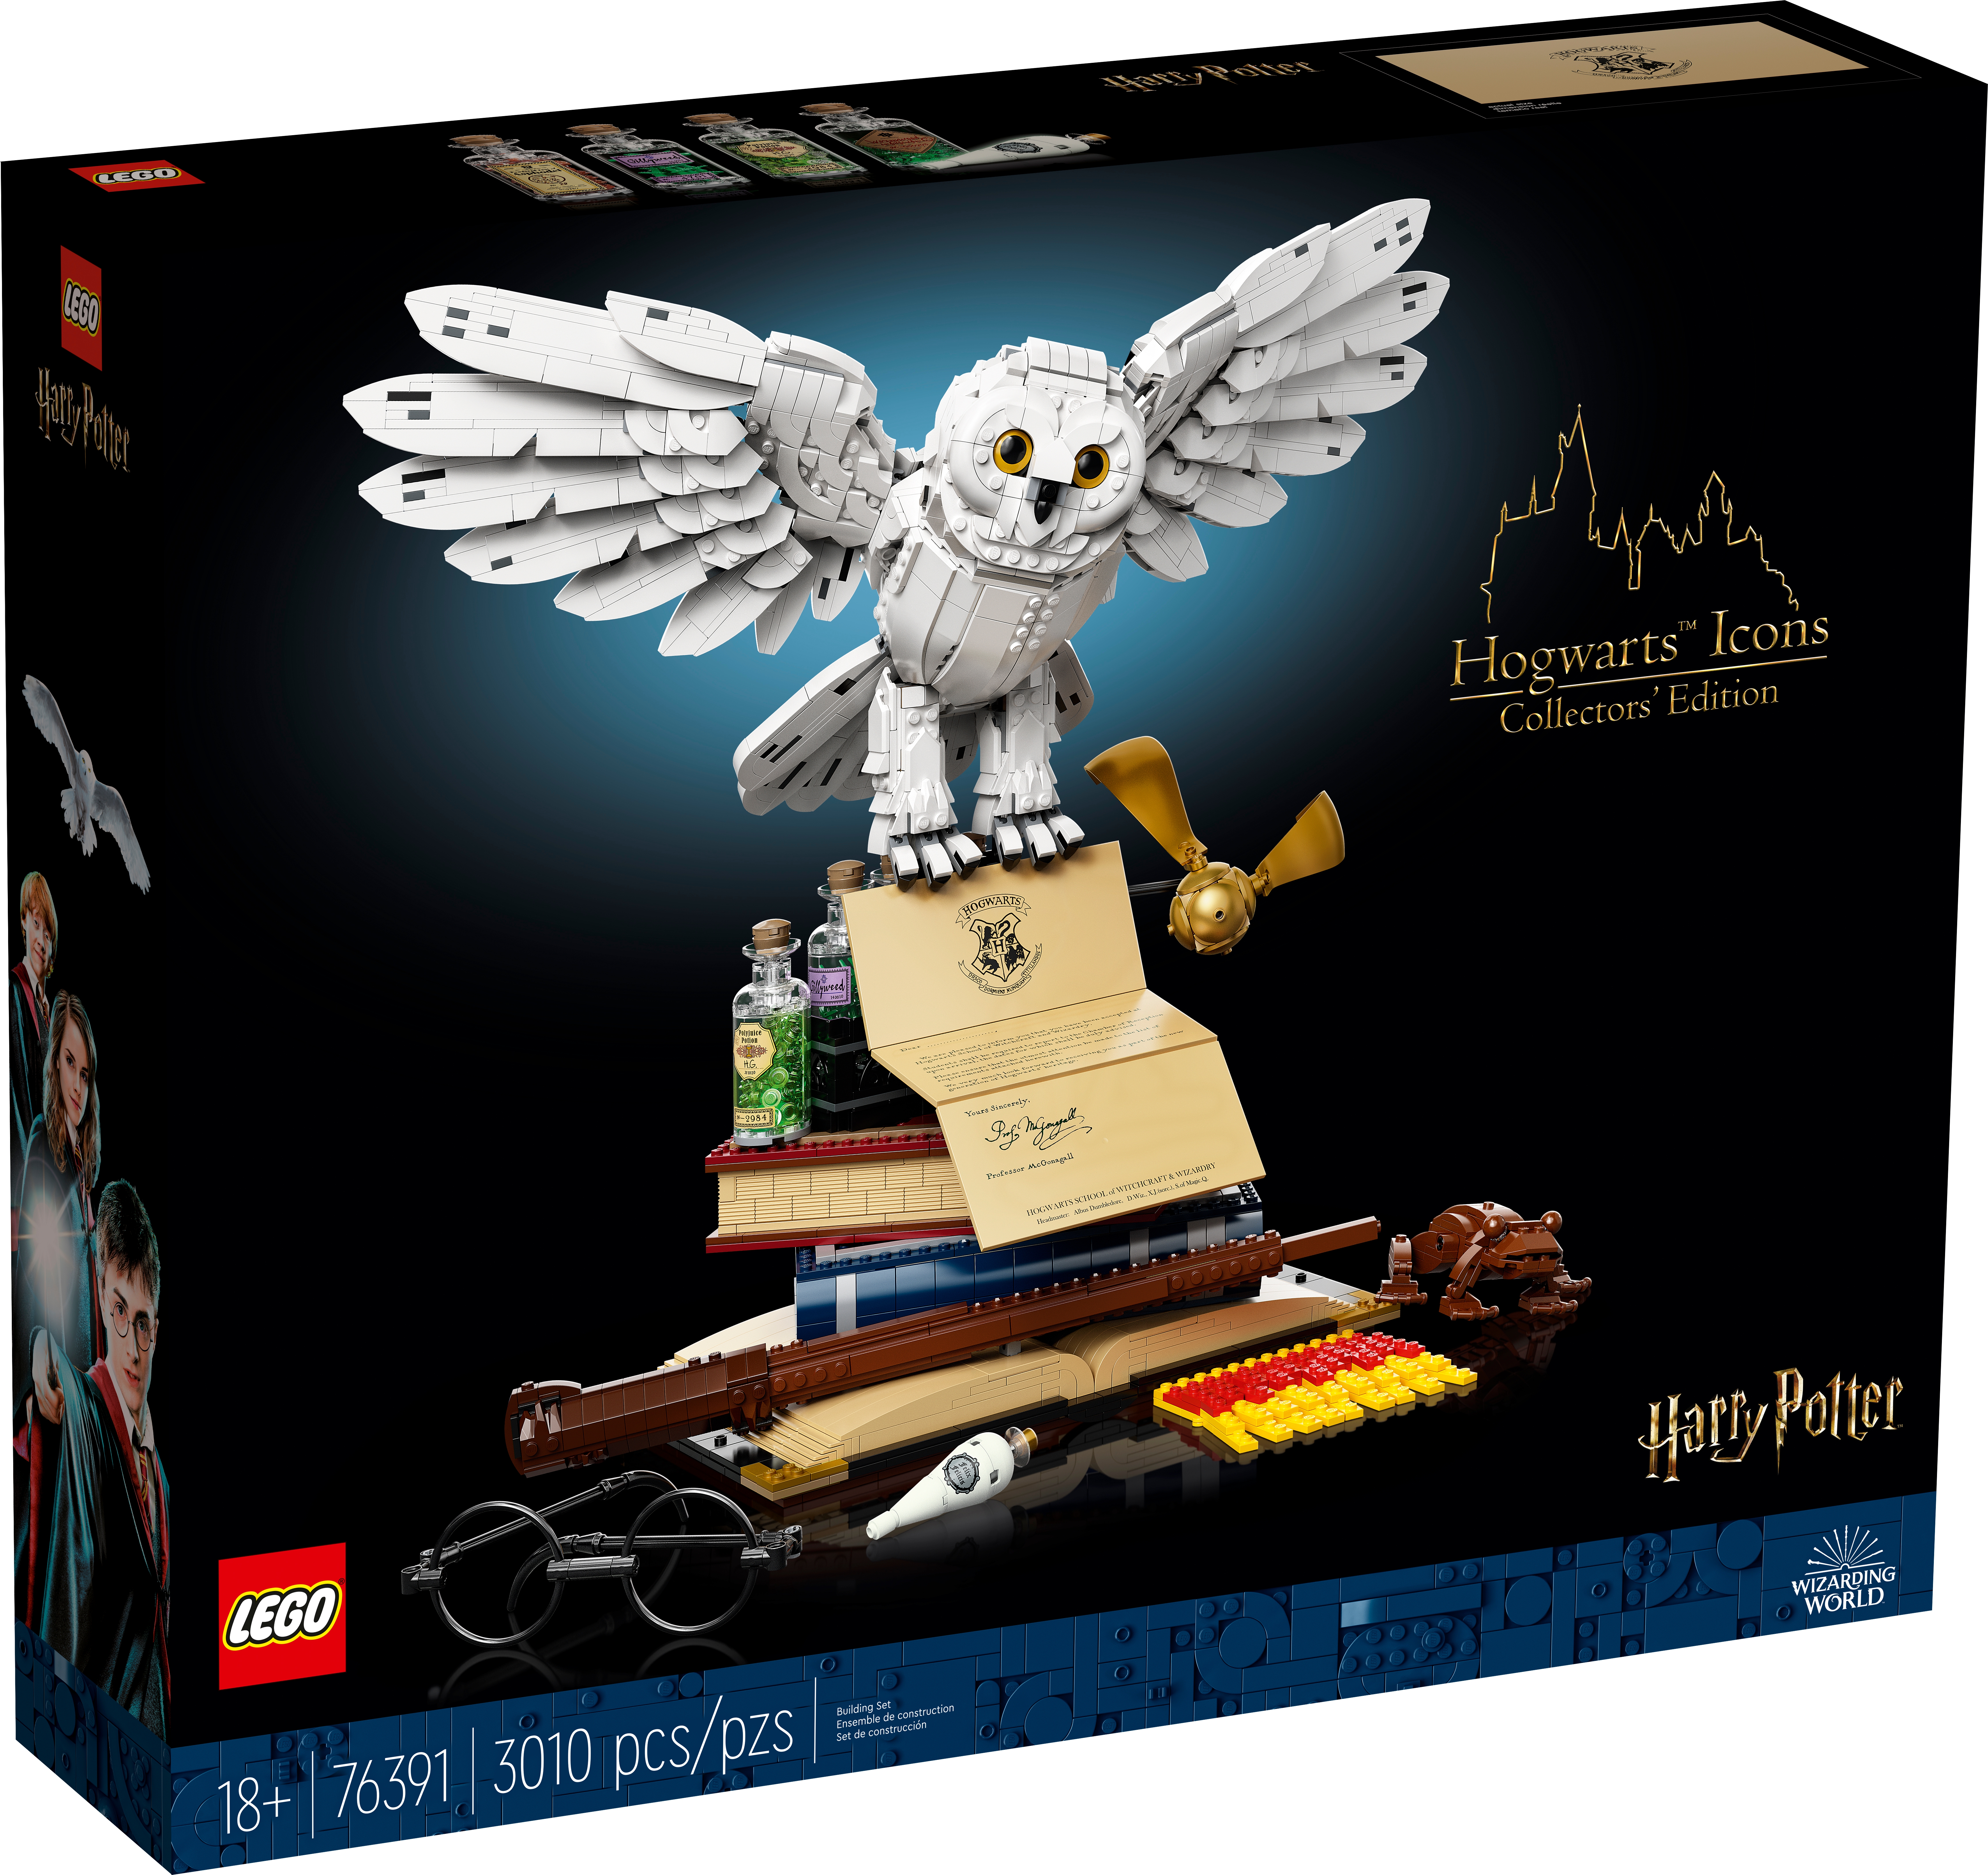 Hogwarts™ Icons - Collectors' Edition 